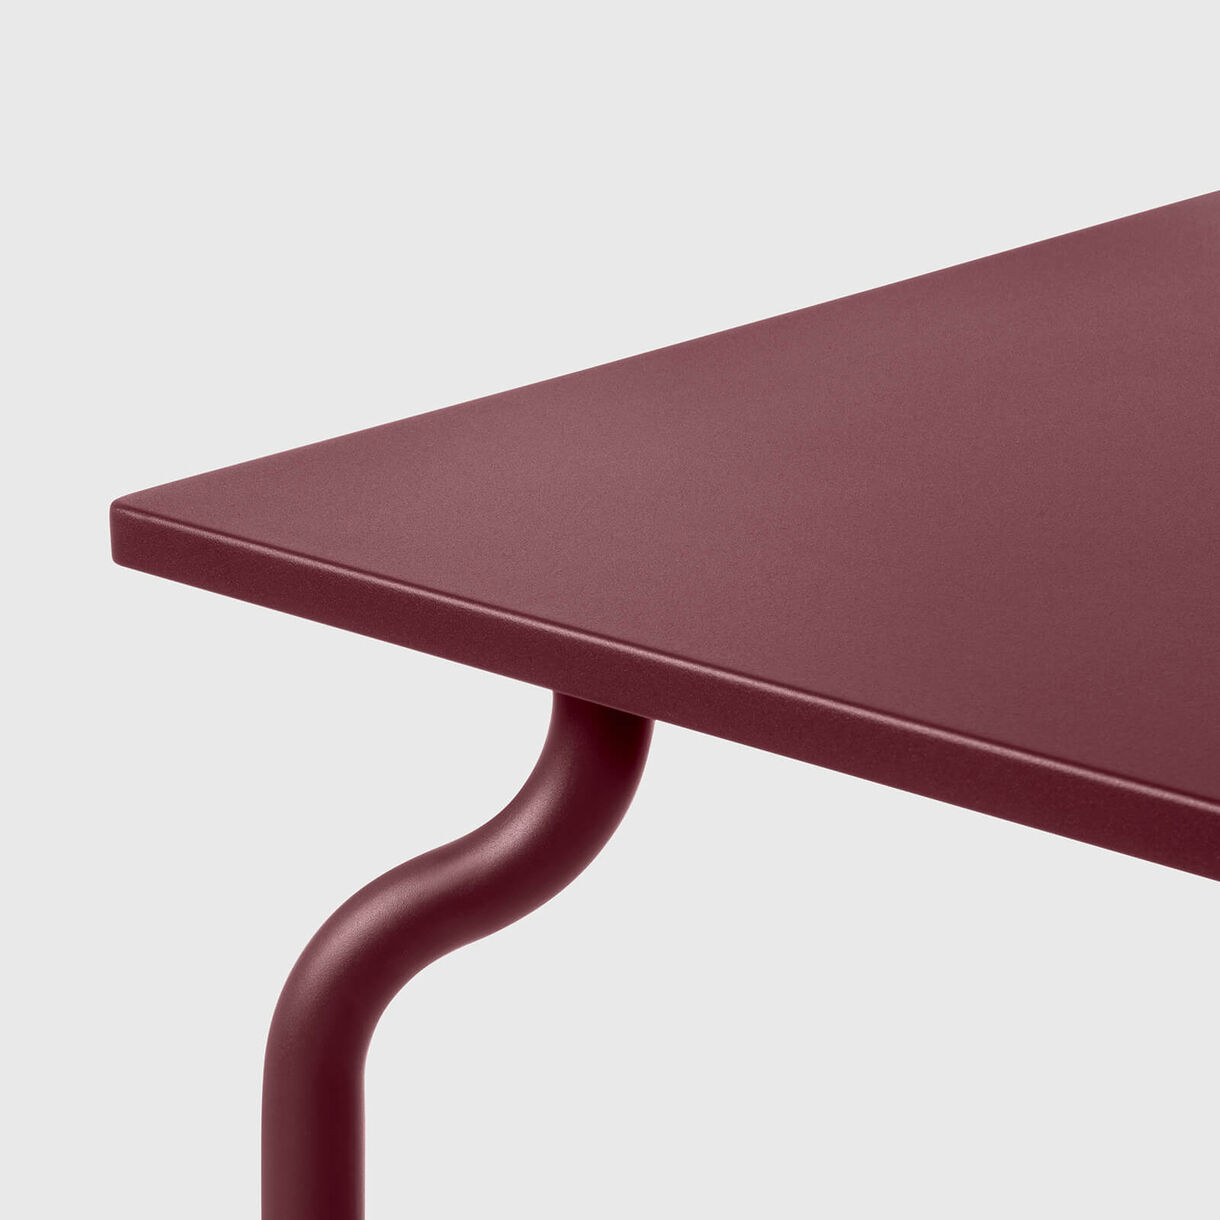 South Table, Steel Red Bordeaux